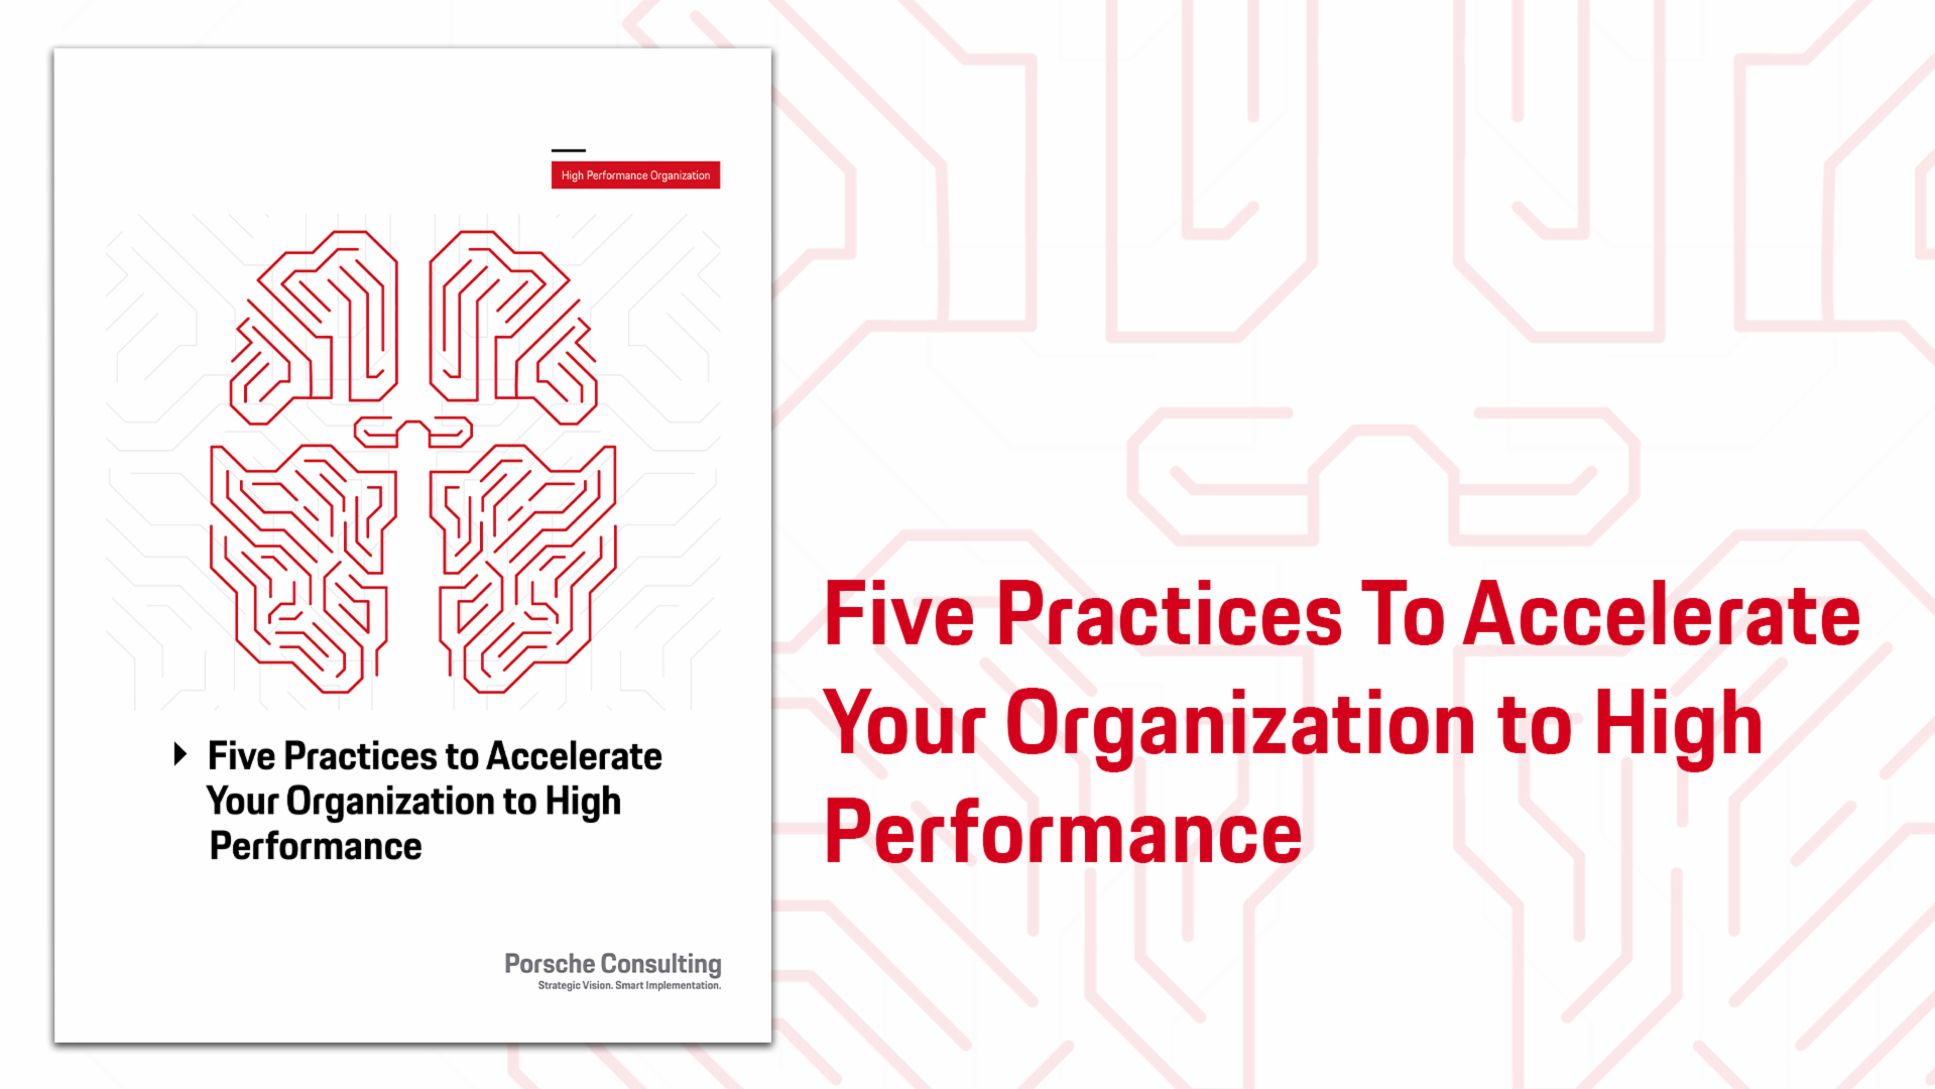 Five Practices to Accelerate Your Organization to High Performance, 2018, Porsche Consulting